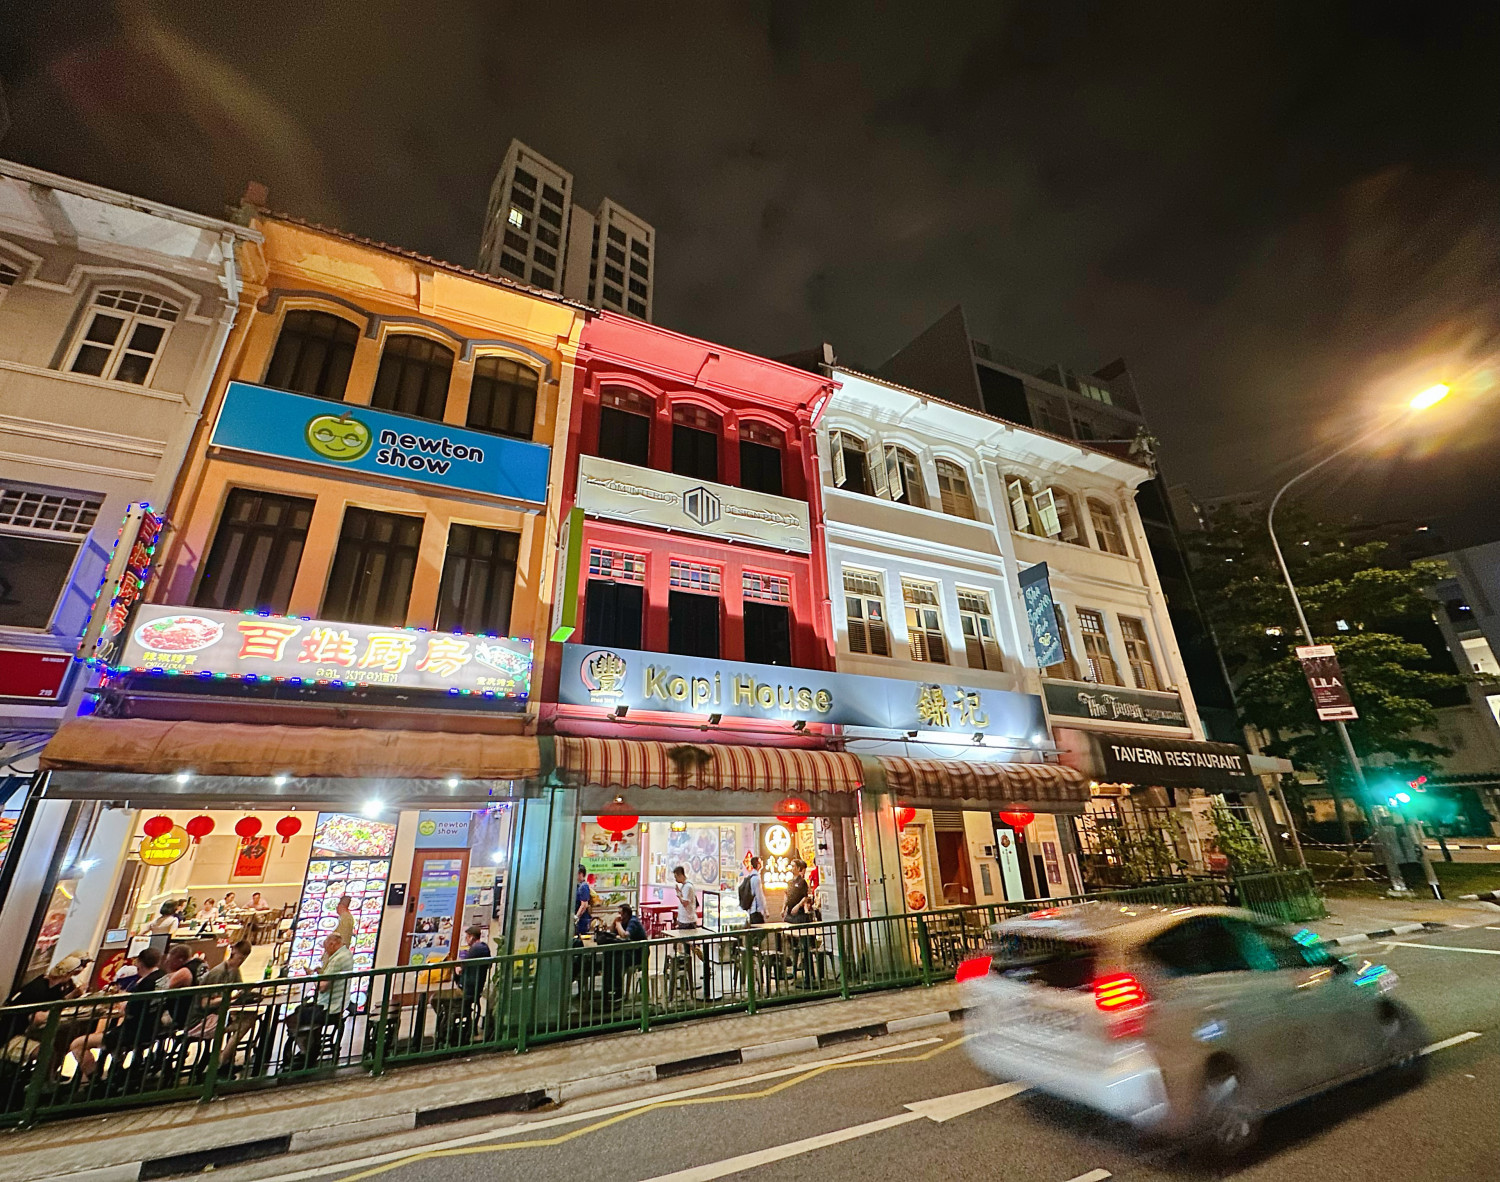 Shophouse on River Valley Road for sale from $11.8 mil - Property News